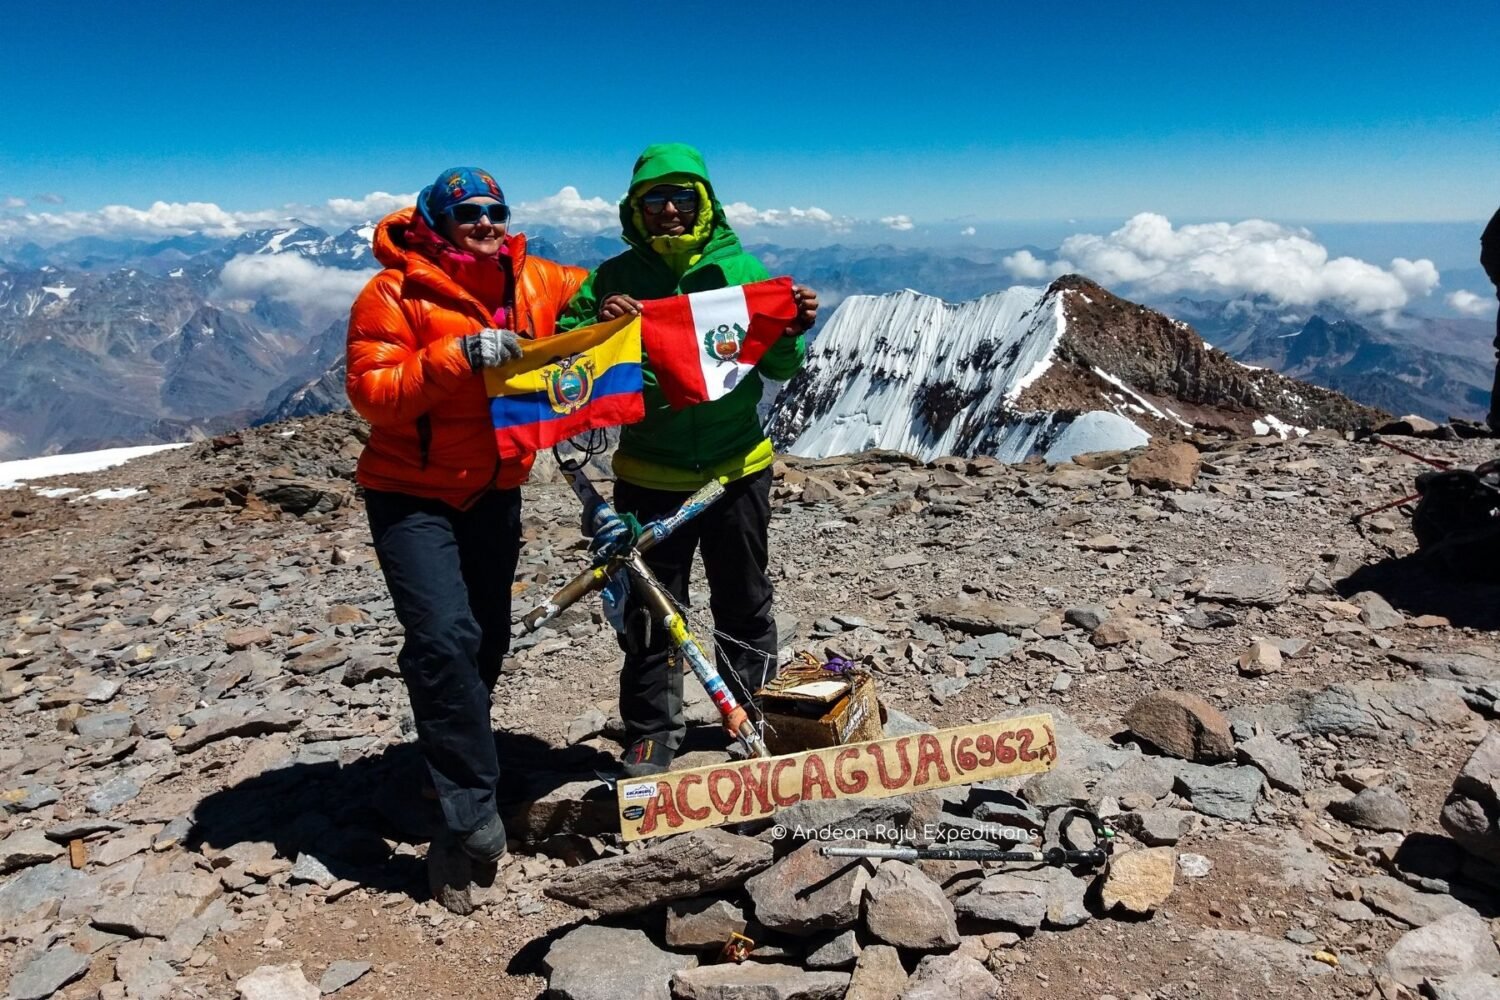 Maite and Pablo at the summit of Aconcagua